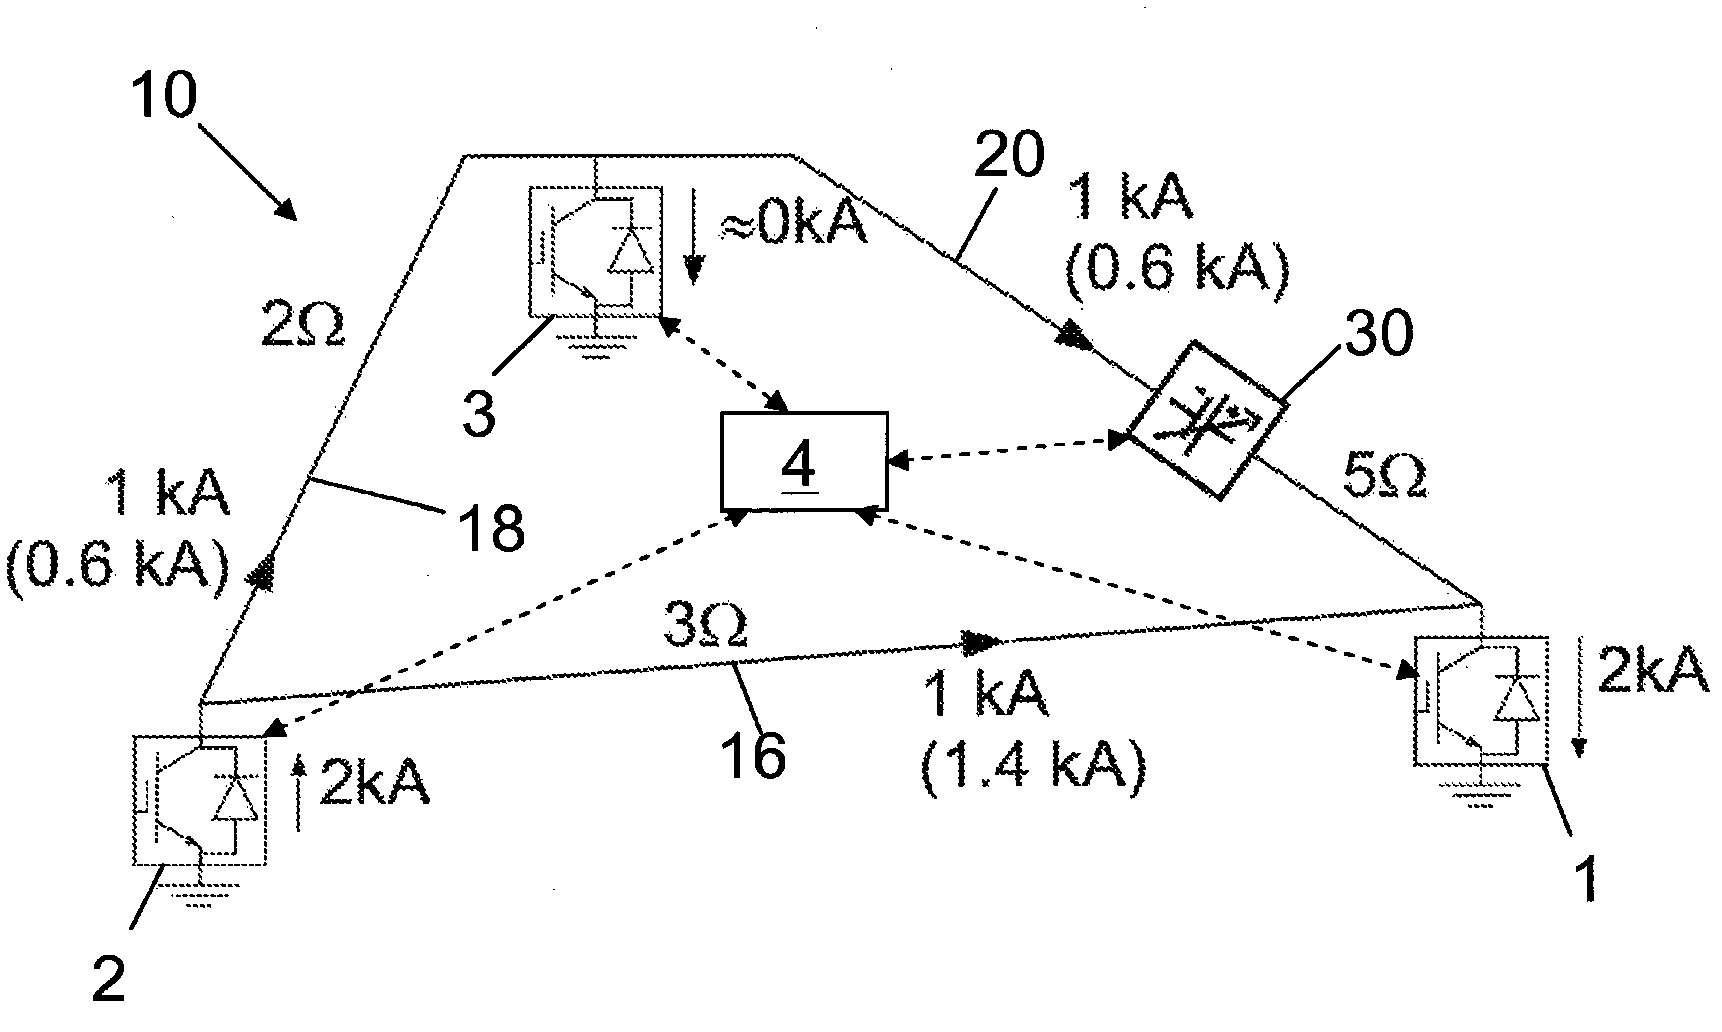 Power flow control in a meshed HVDC power transmission network